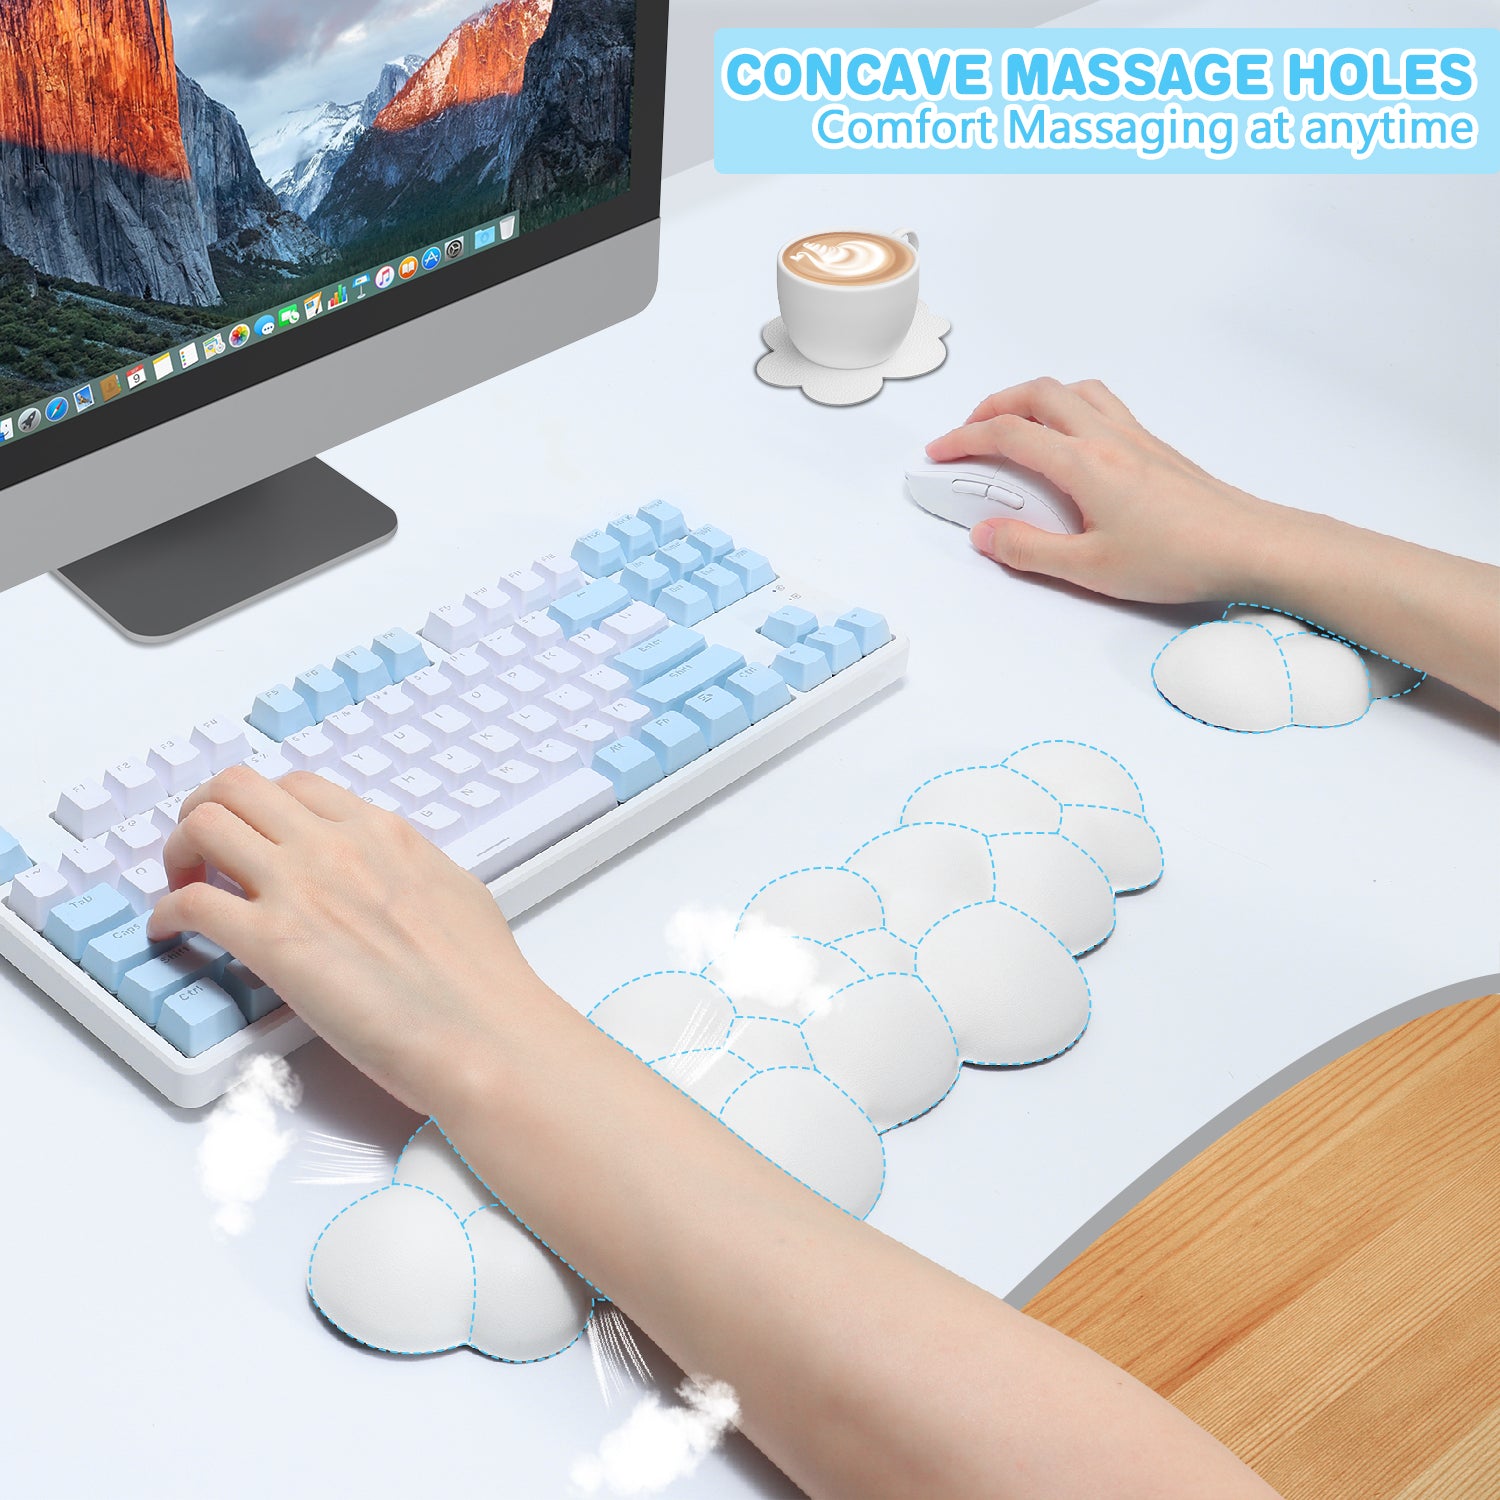 MAMBASNAKE Cloud Keyboard Mouse Wrist Rest with Coaster Set,Ergonomic Palm Rest Combo for for Comfortable Typing/Gaming -3 in 1 Set